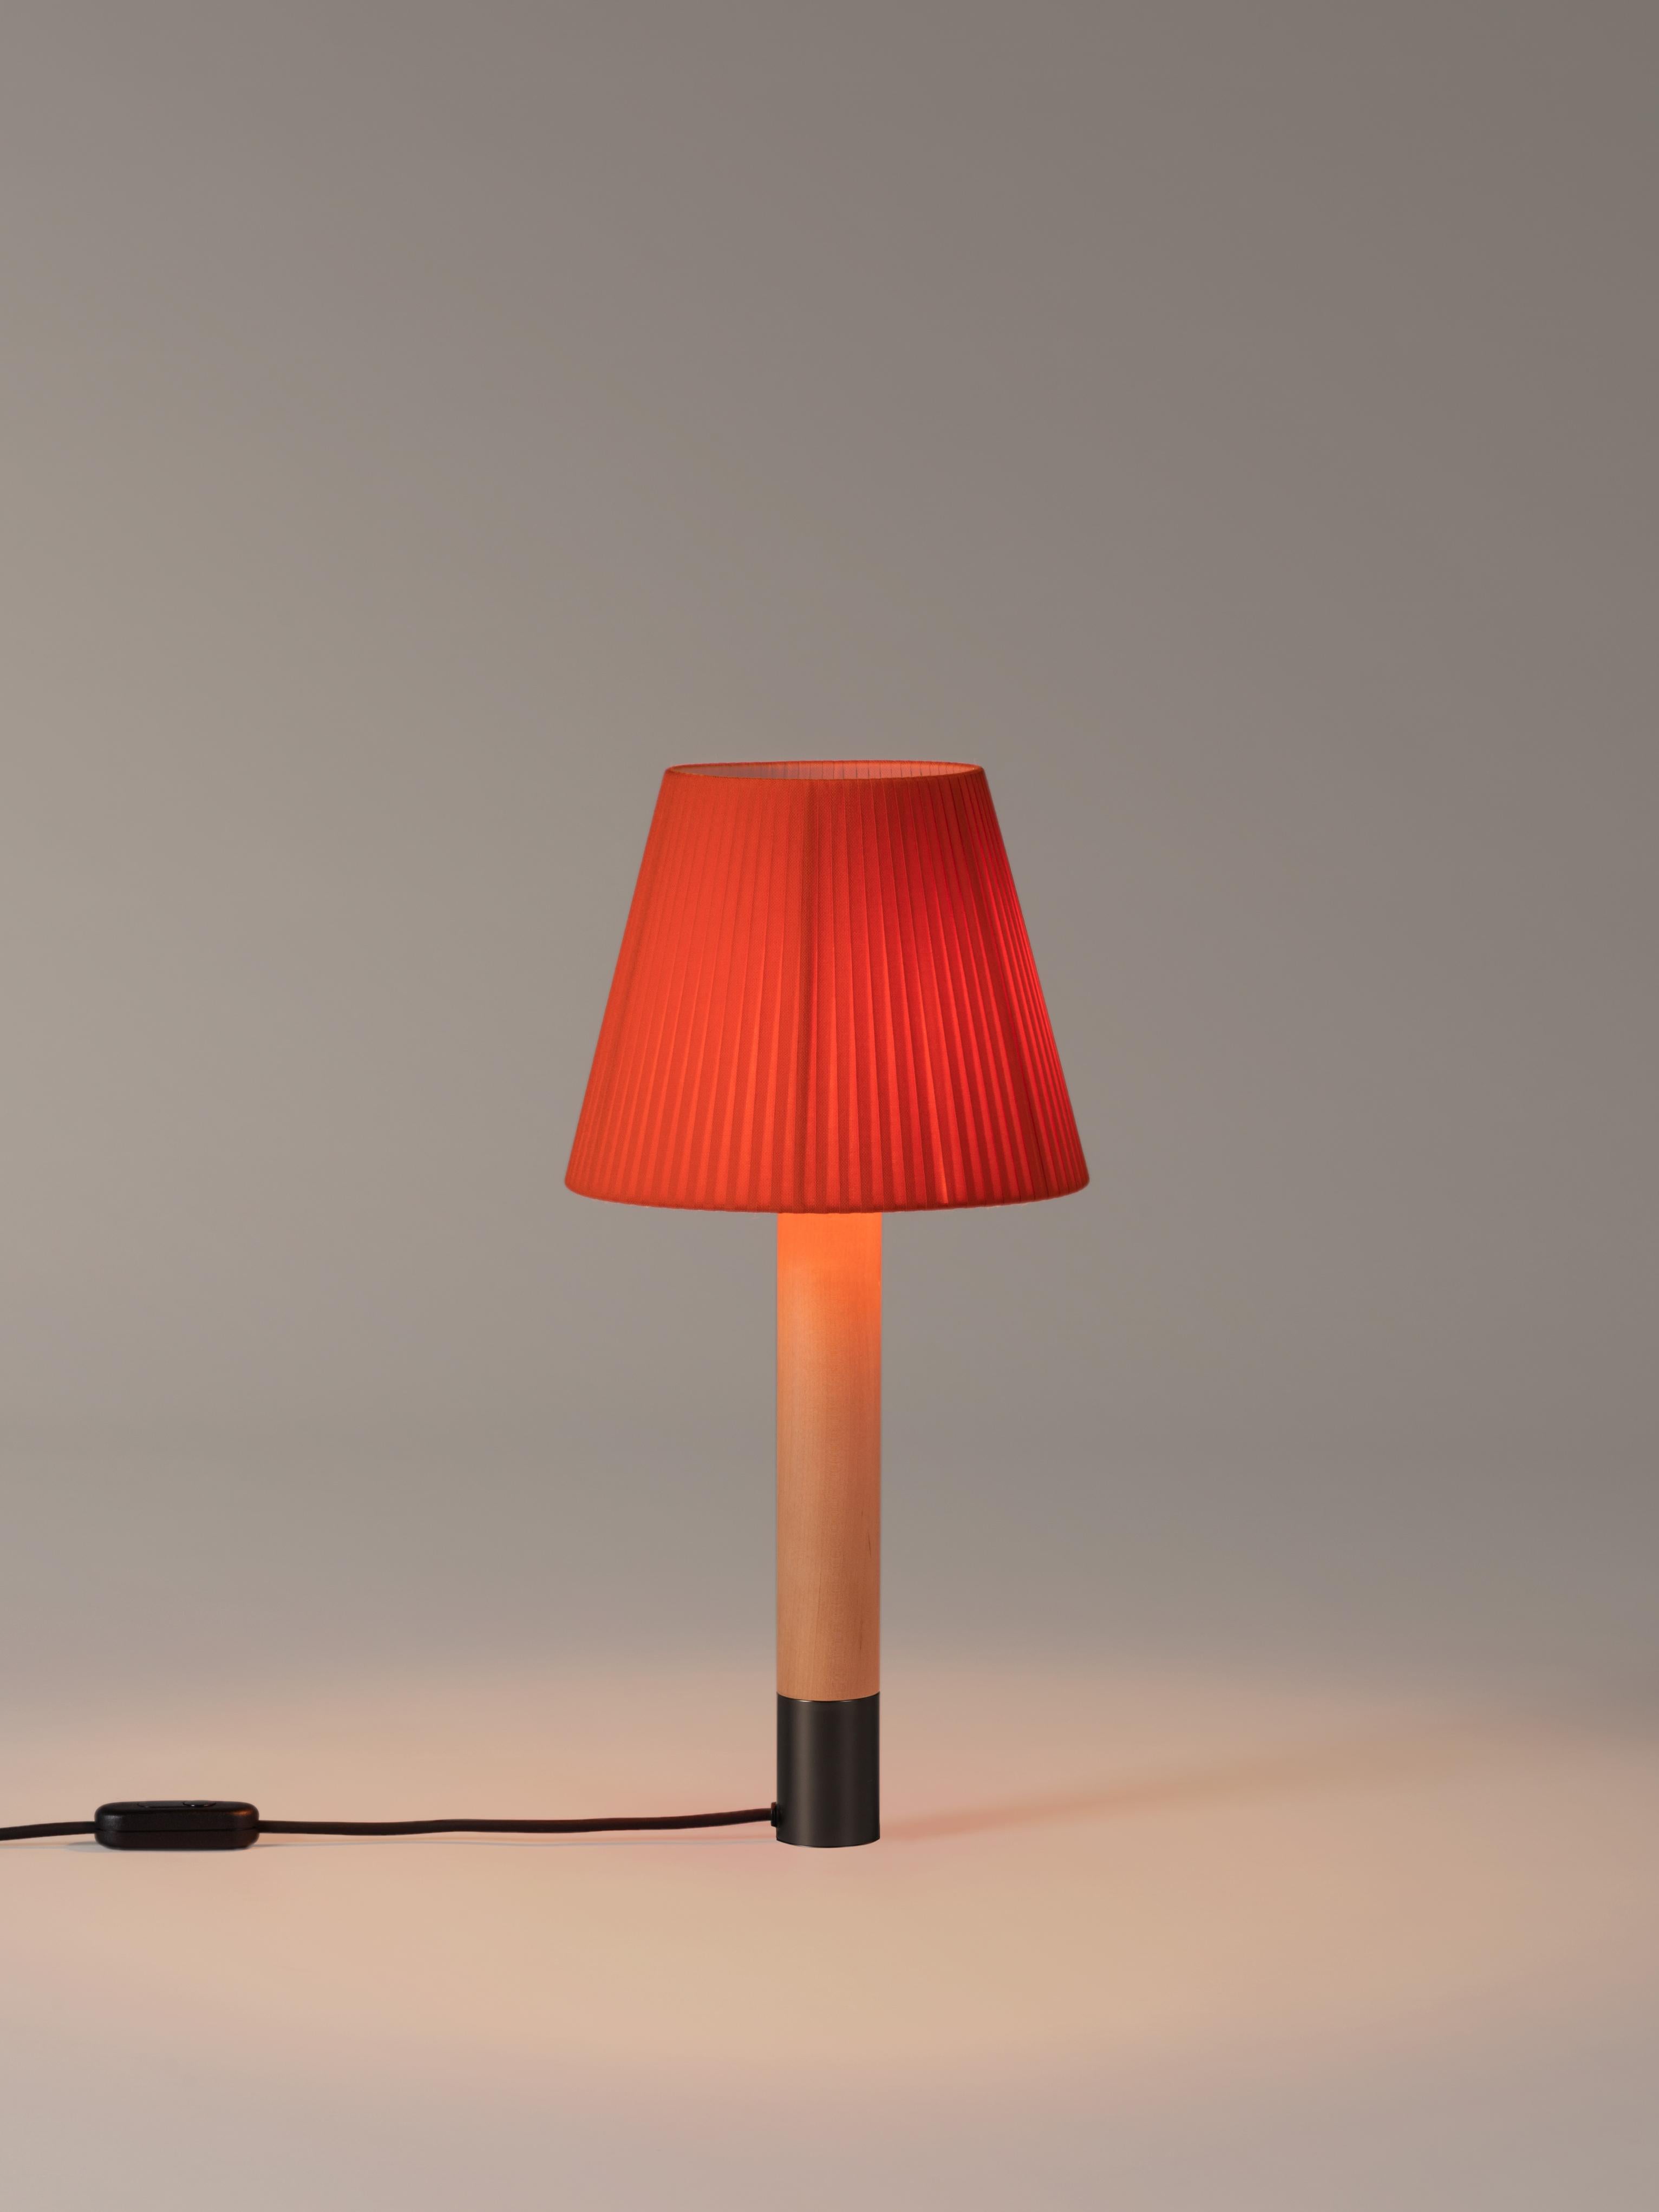 Bronze and Red Básica M1 table lamp by Santiago Roqueta, Santa & Cole
Dimensions: D 25 x H 52 cm
Materials: Bronze, birch wood, ribbon.
Available in other shade colors and with or without the stabilizing disc.
Available in nickel or